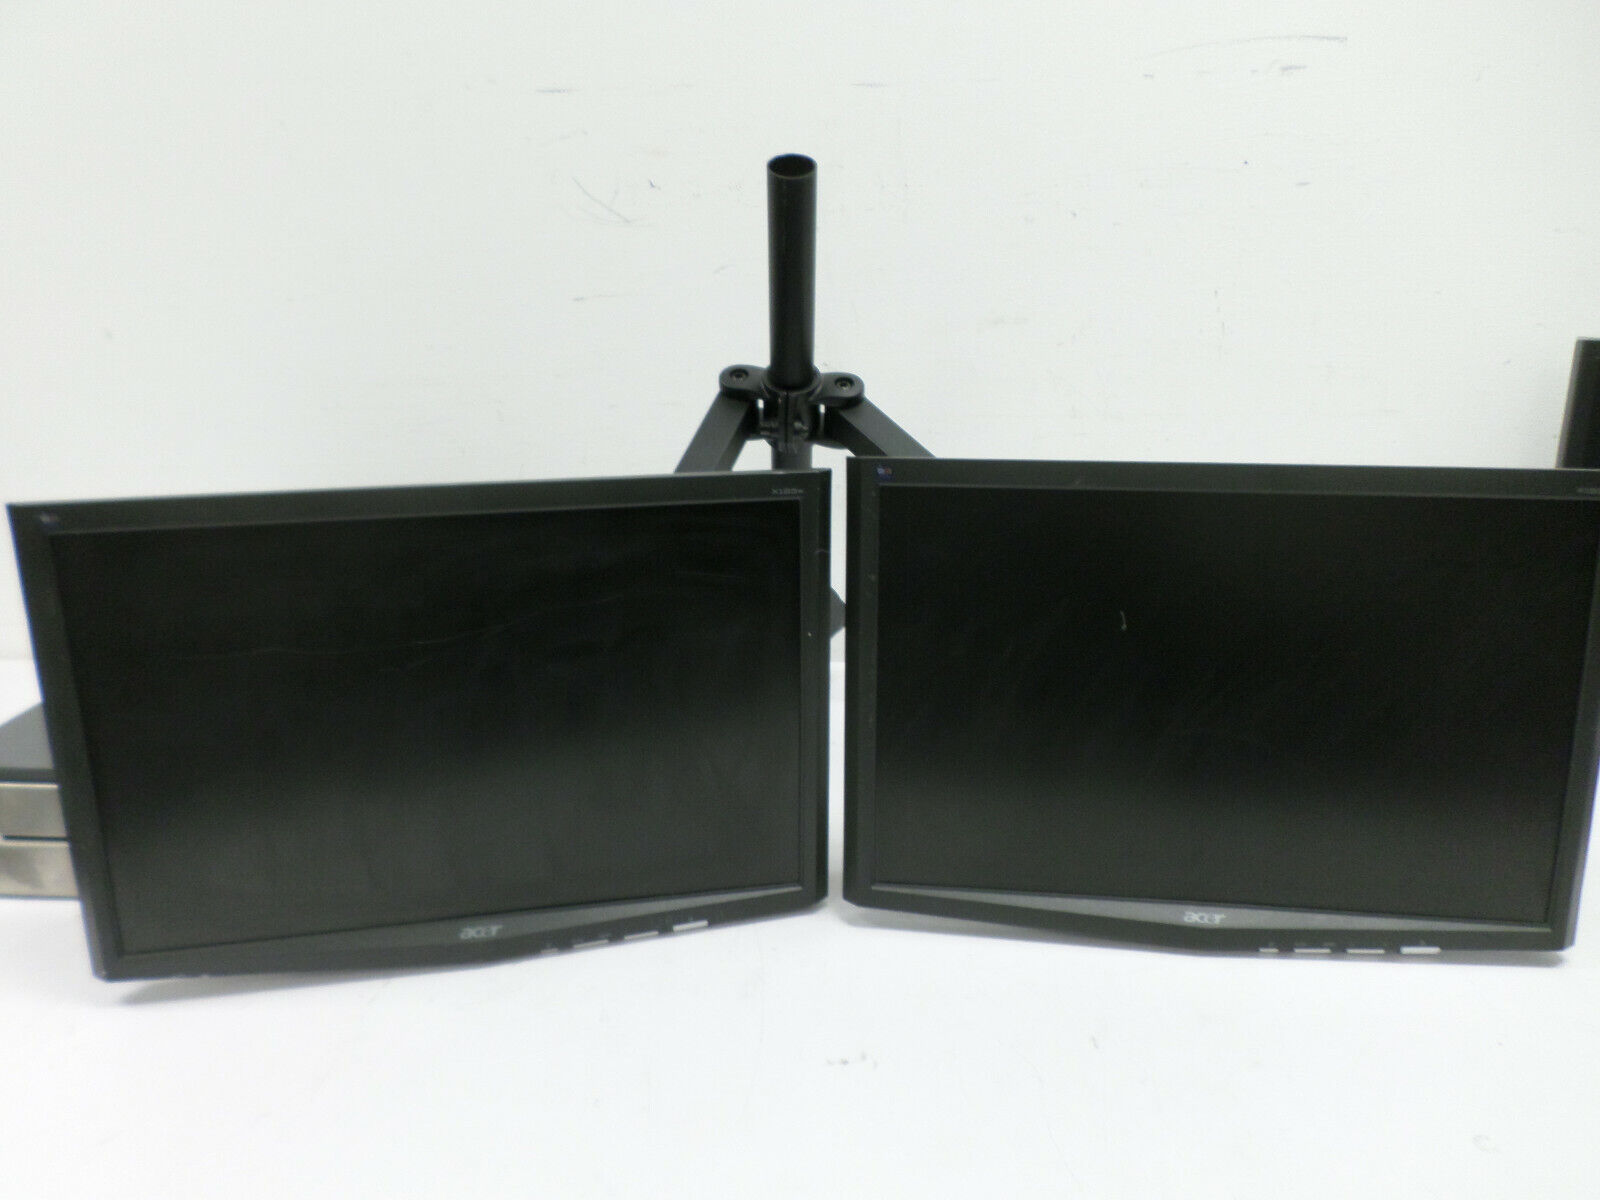 Halter Hex Extendable LCD Monitor Desk Stand 02-1458a w/ 2 x Acer X193w Monitors